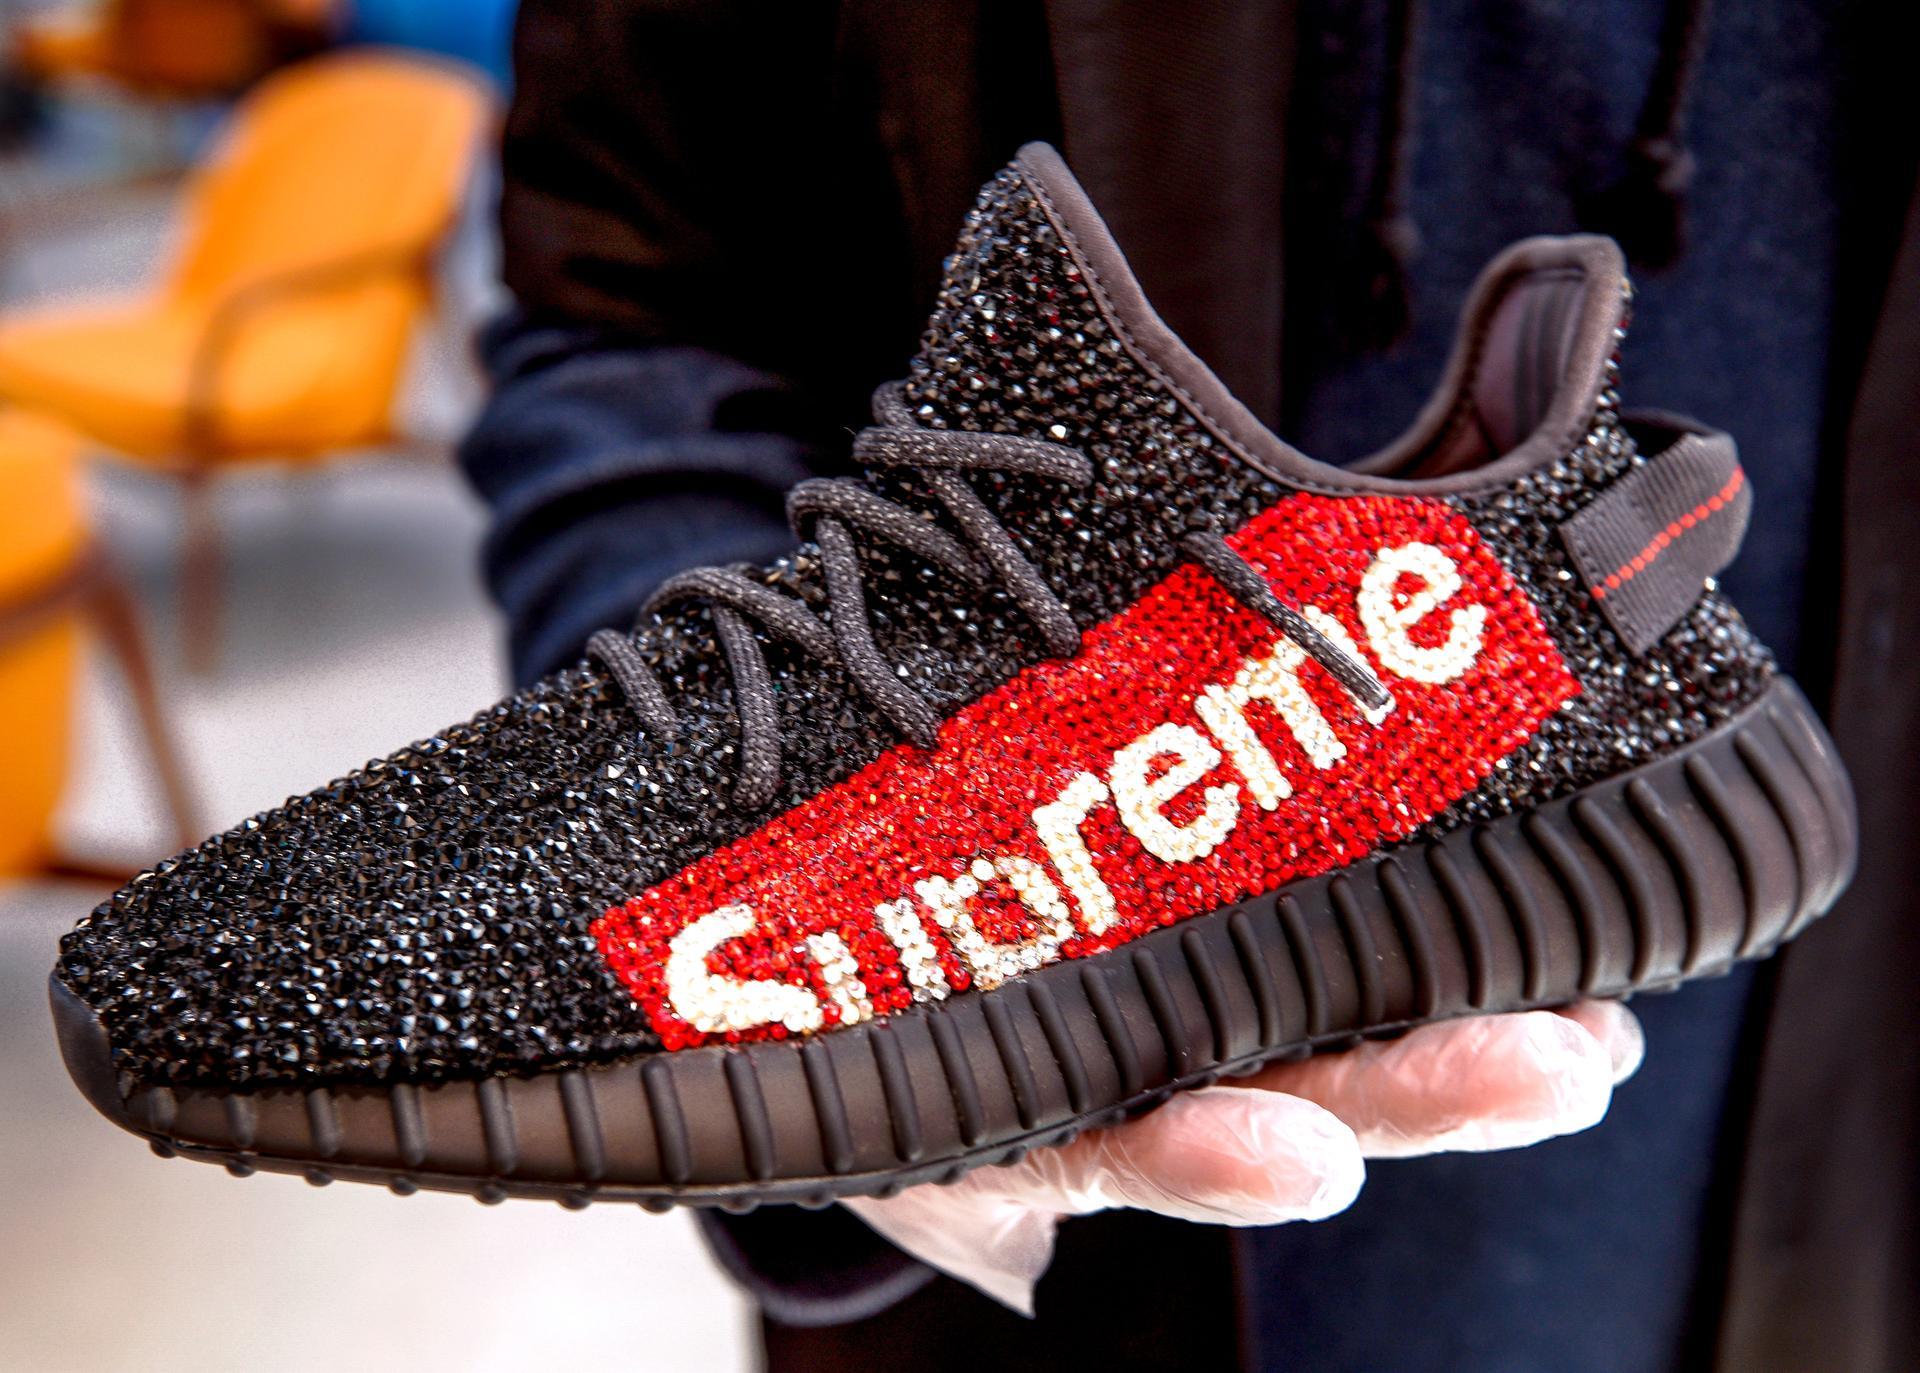 Nike Air Yeezys Sell for $1.8 Million, Setting New Record